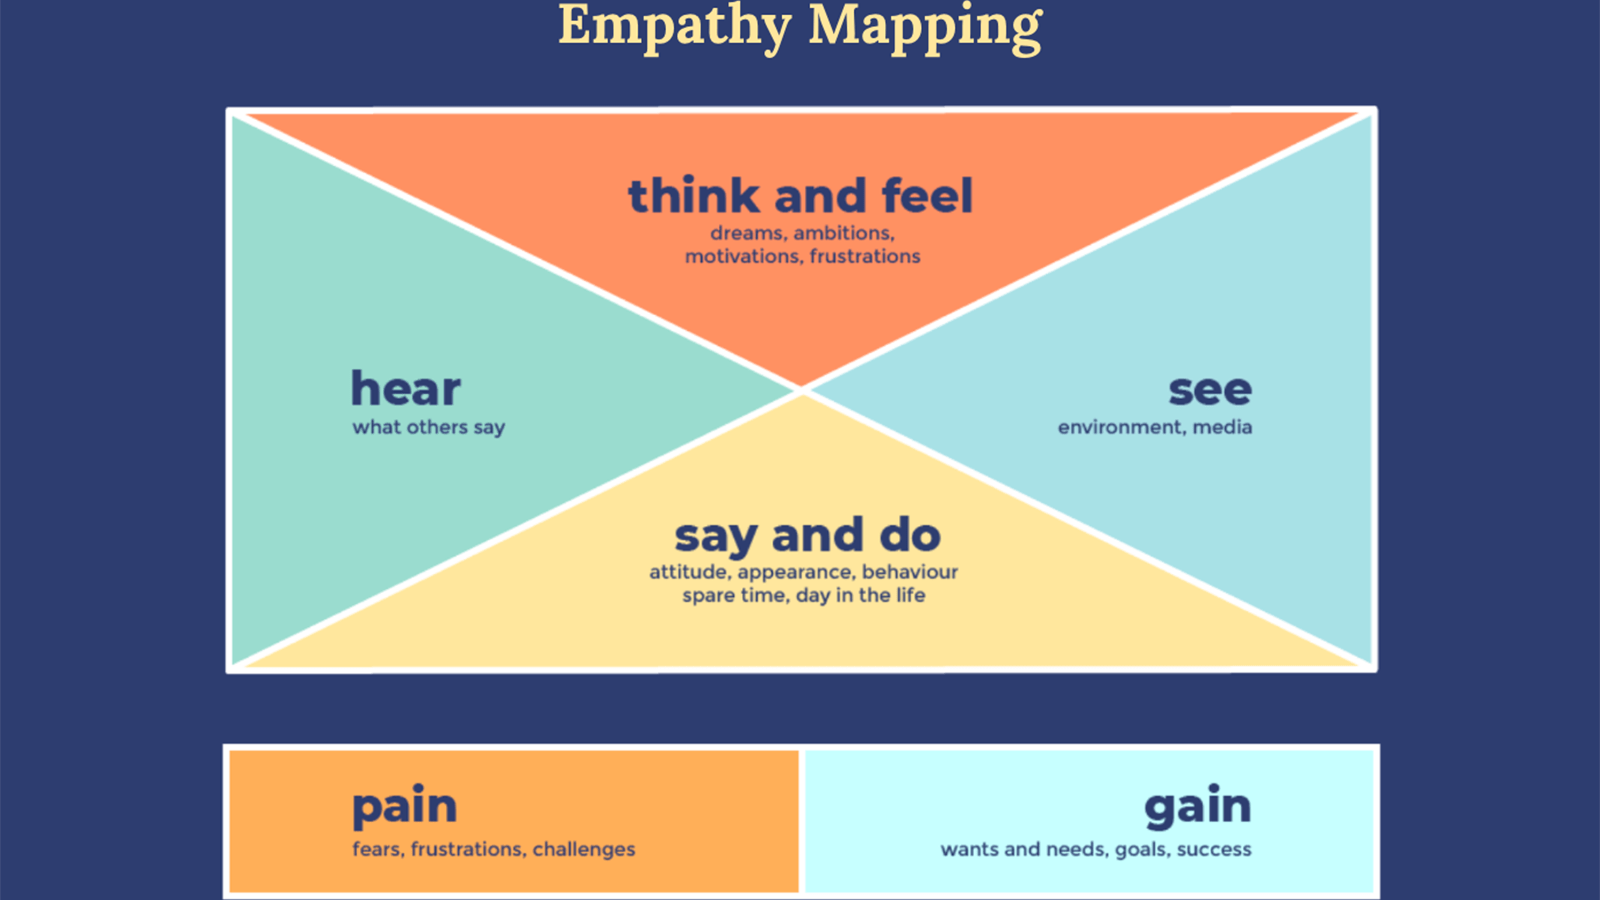 An Alternative Mapping- Empathy Map